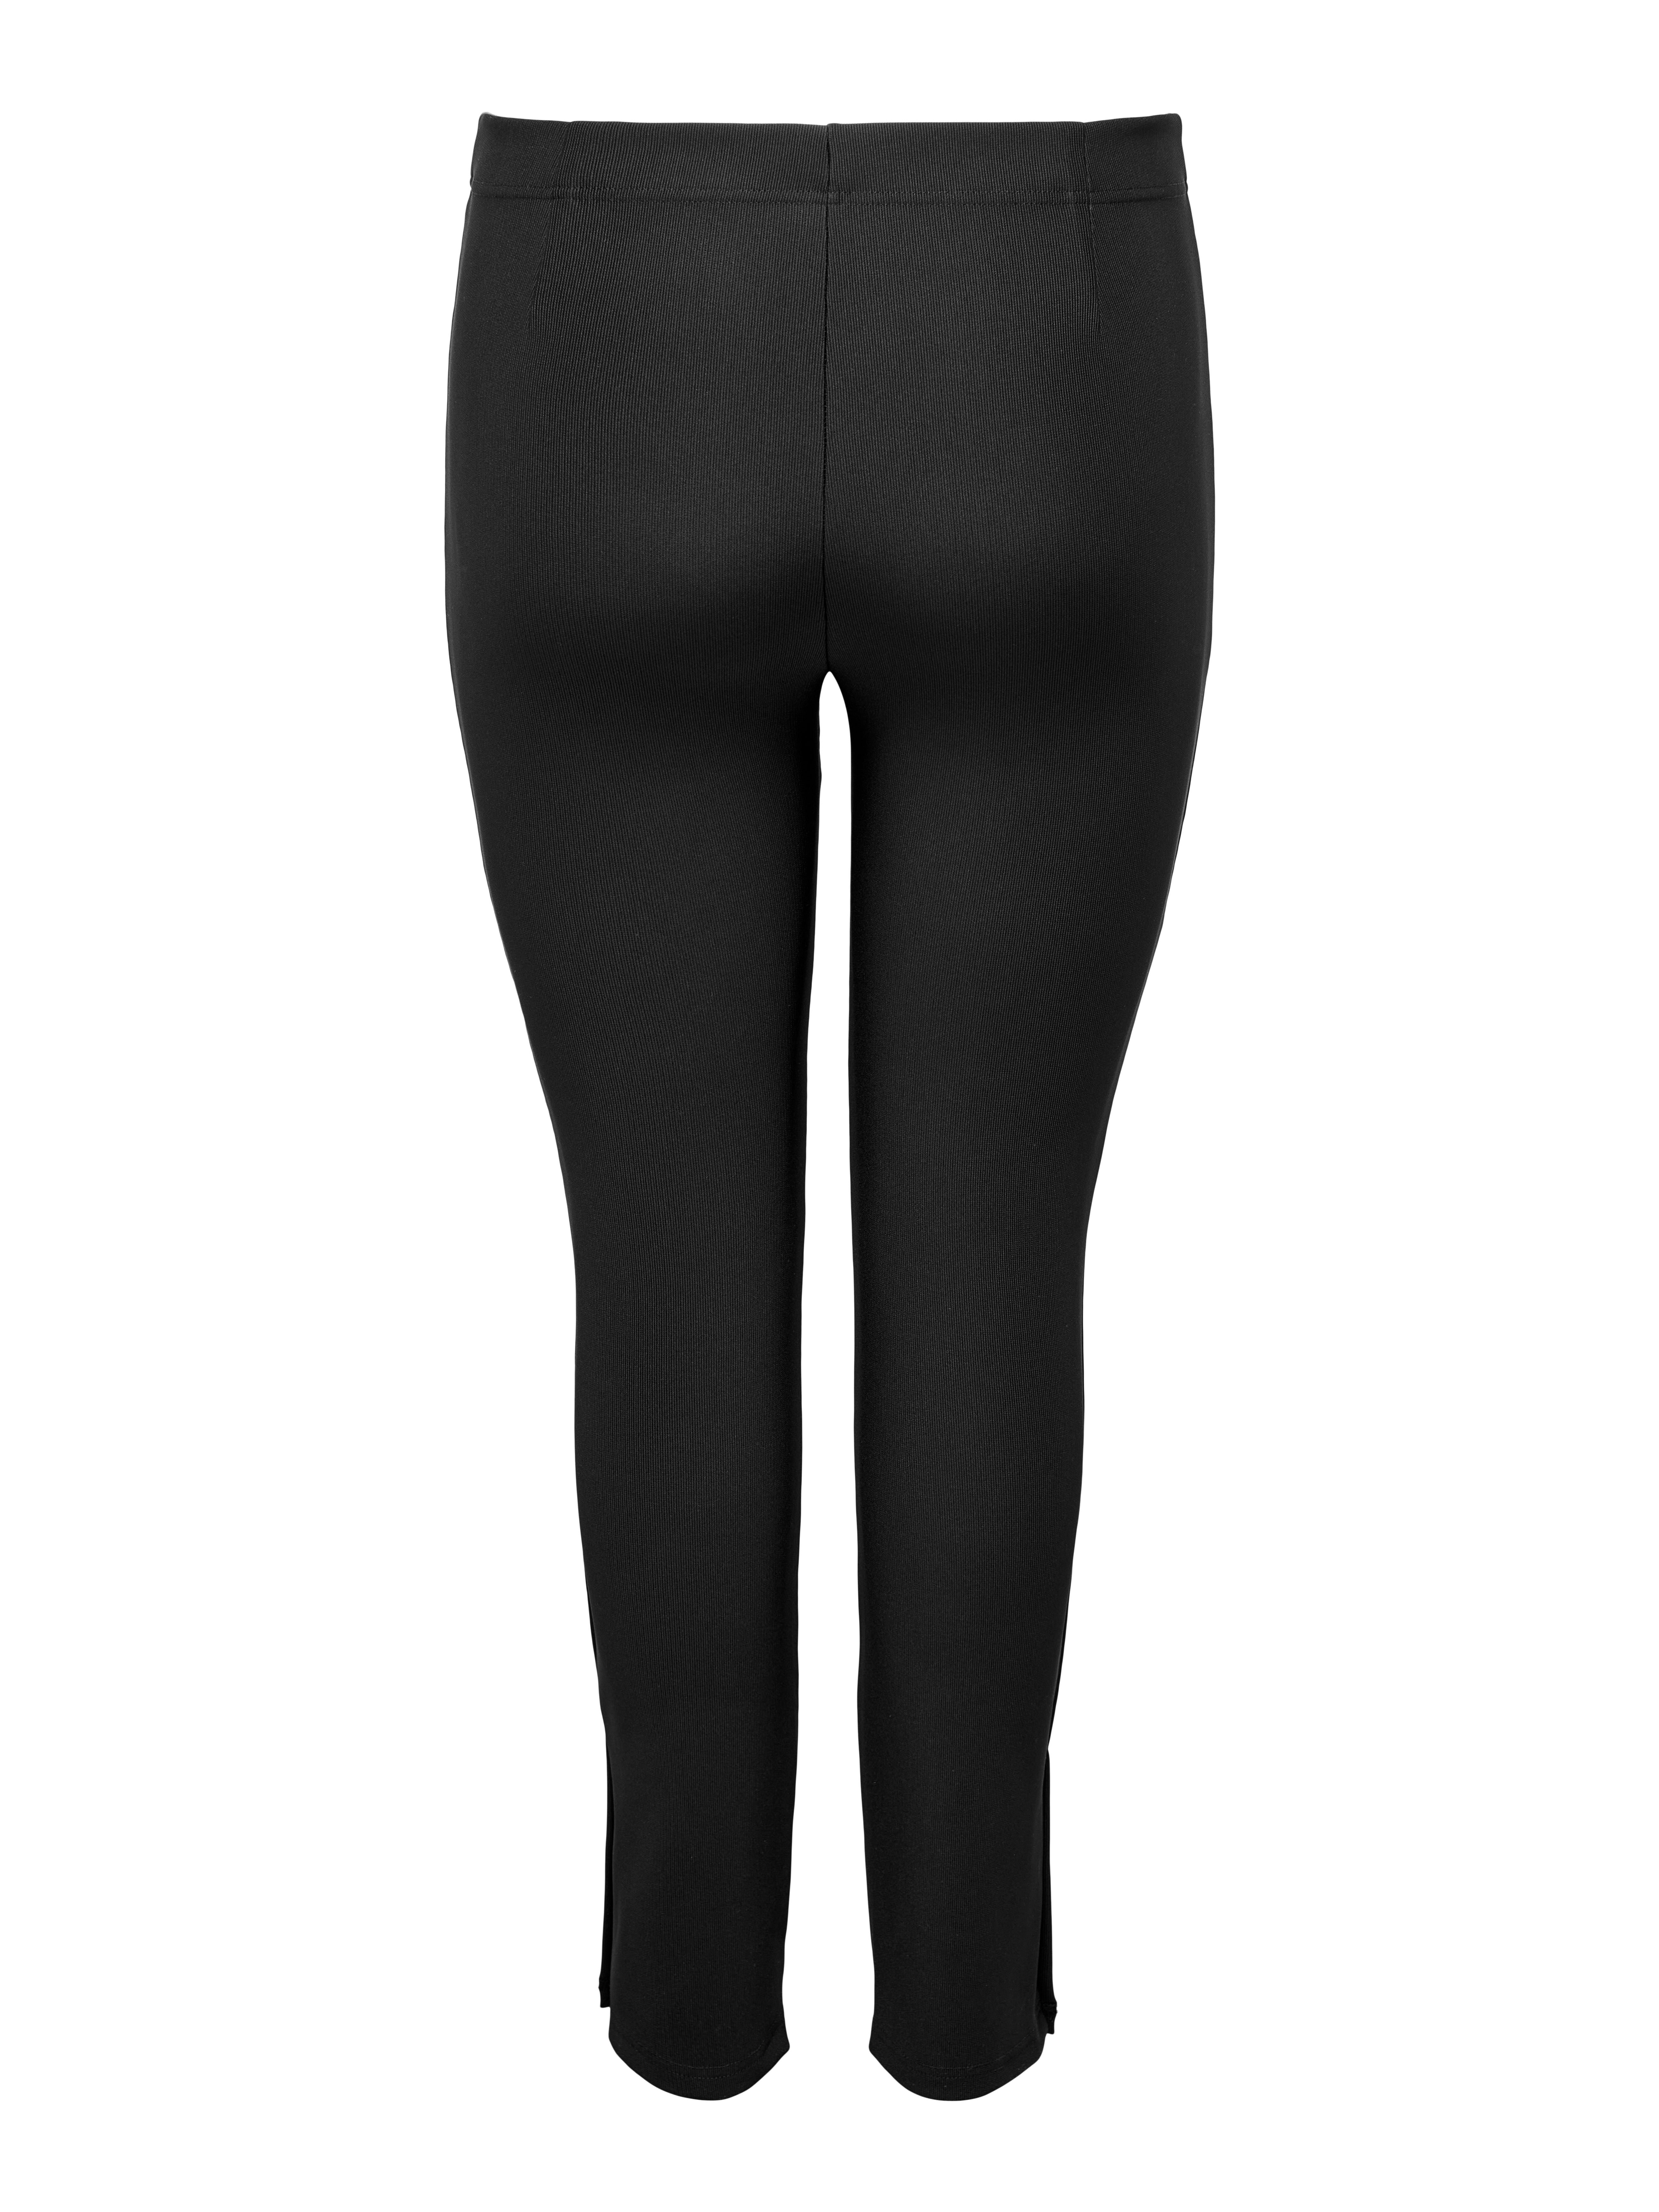 Curvy slit detail Leggings with 40% discount!